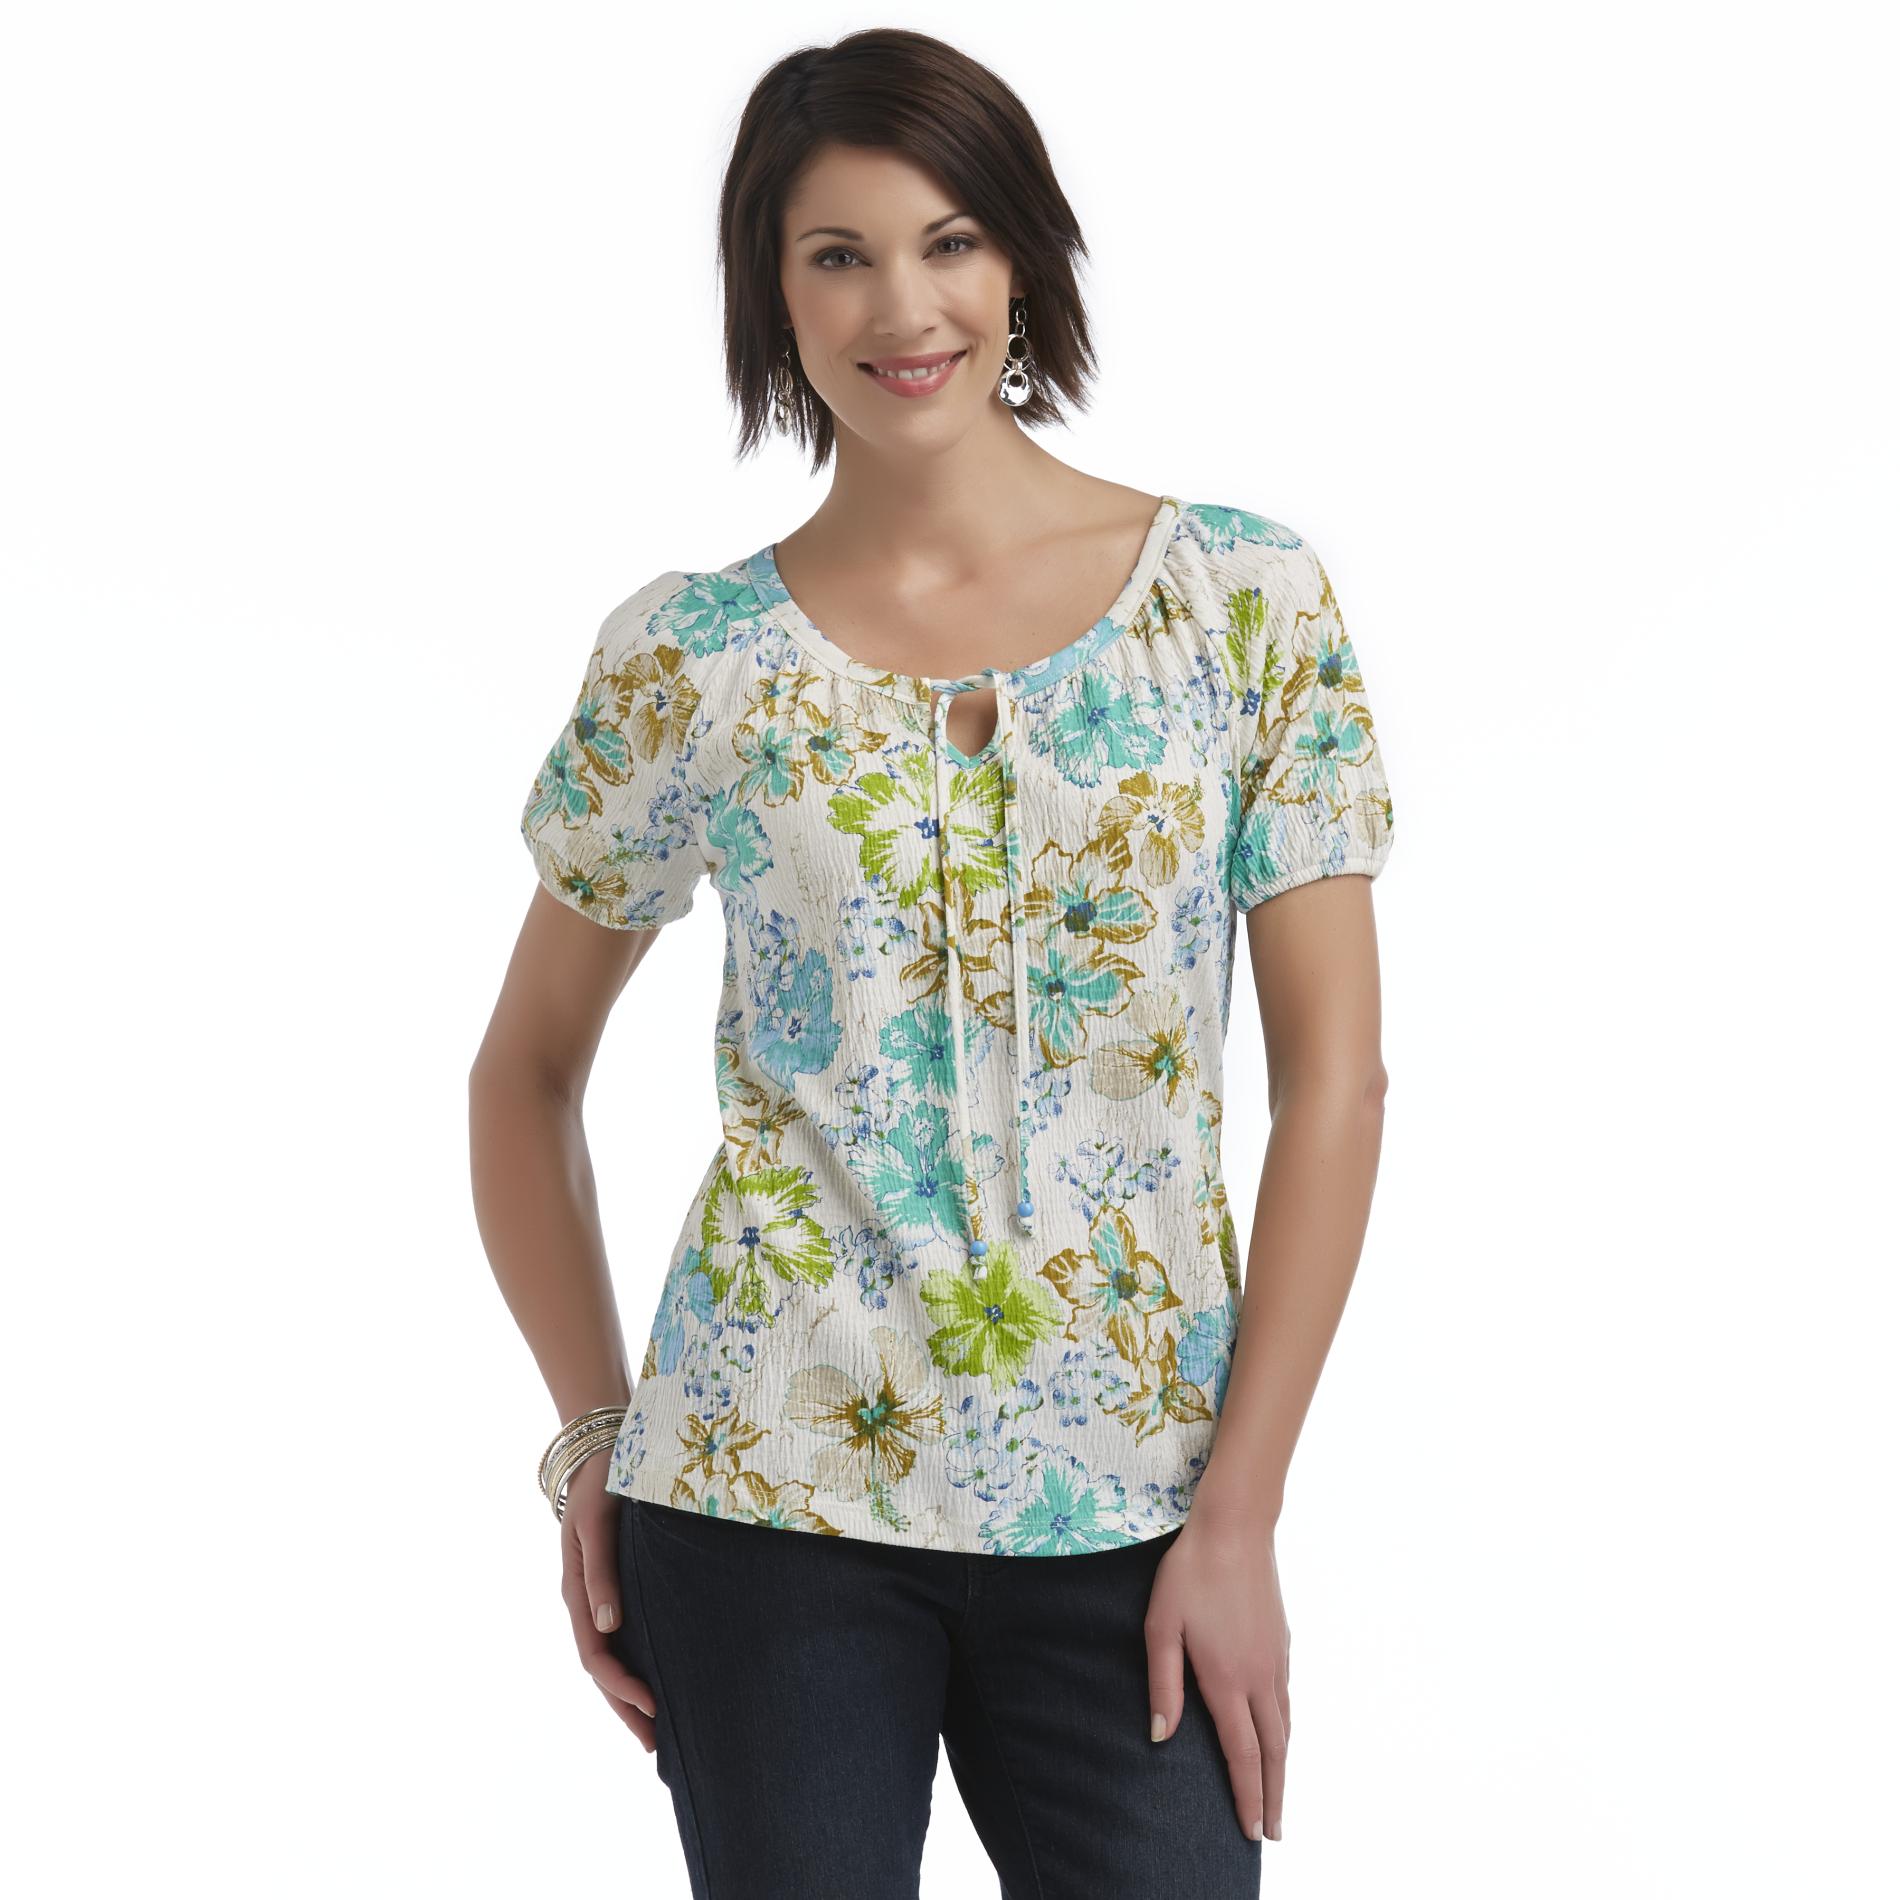 Basic Editions Women's Peasant Crinkle Top - Floral